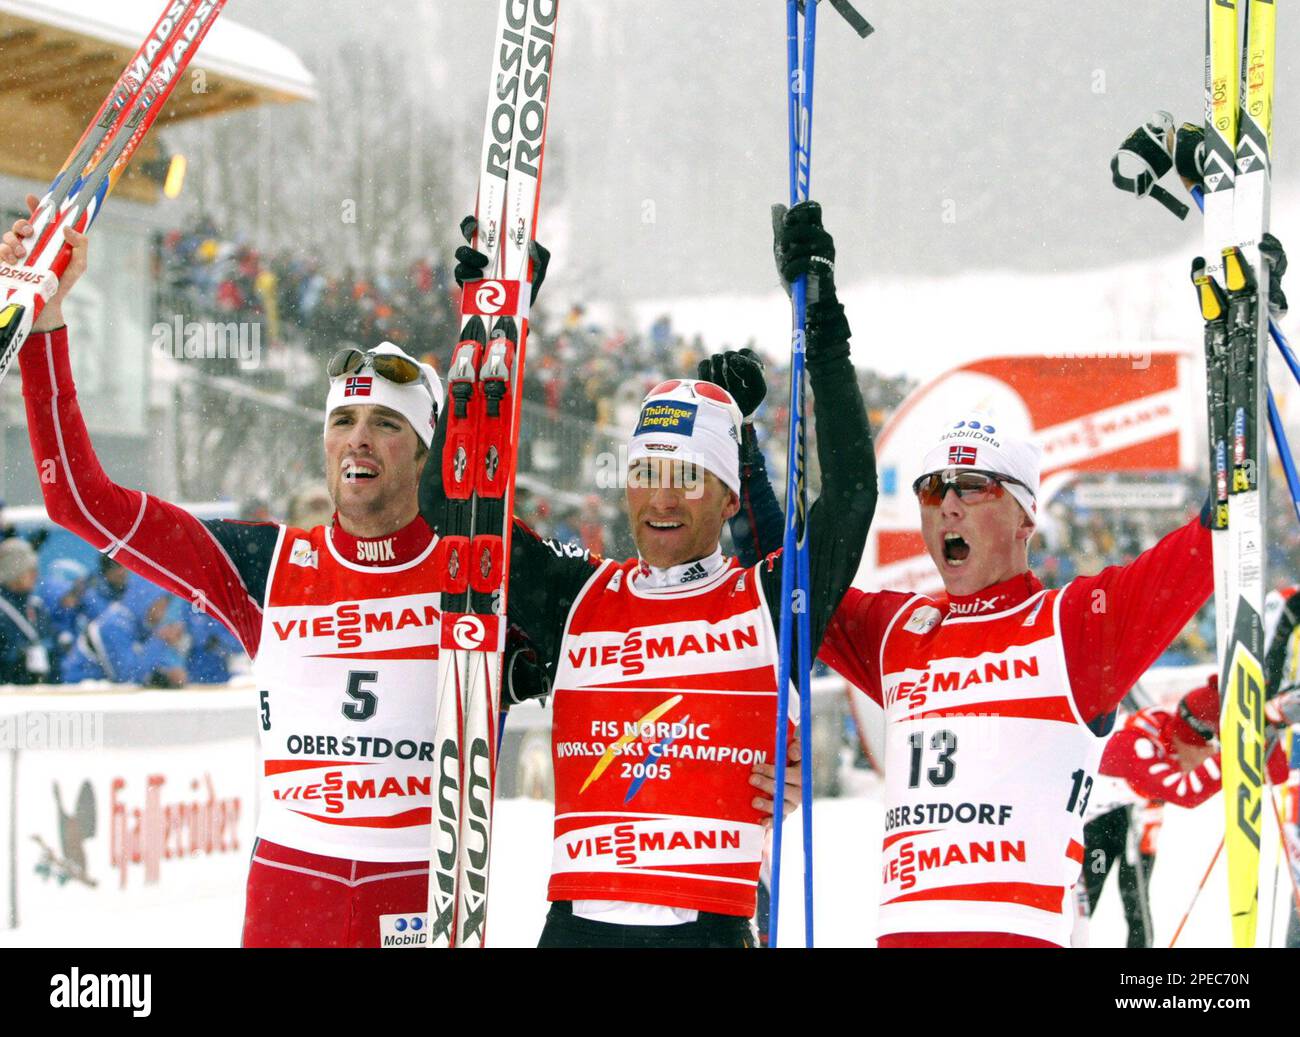 Winner Ronny Ackermann from Germany, center, 2nd placed Magnus Moan, left,  and 3rd placed Kristian Hammer, right, both from Norway, celebrate after  the Nordic Combined sprint event at the Nordic Ski World